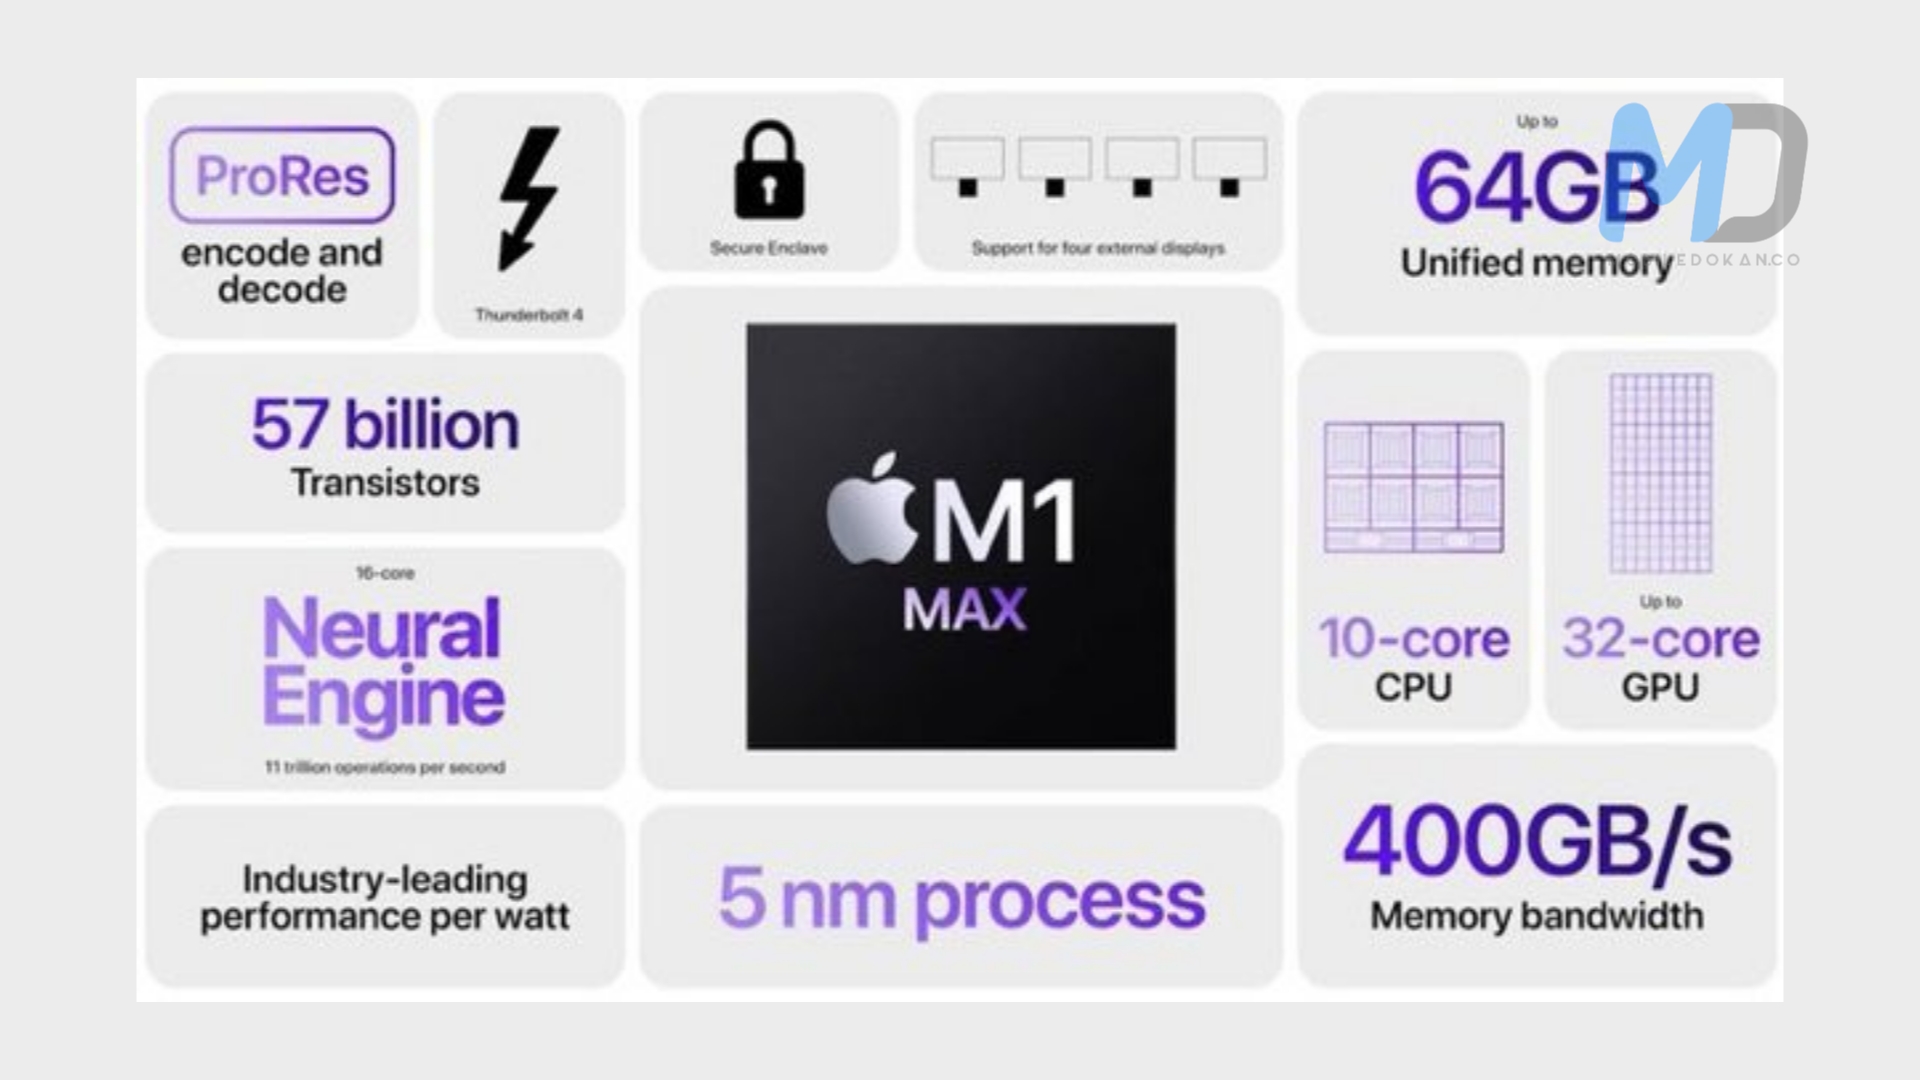 Apple M1 Max is now 2x faster than the M1